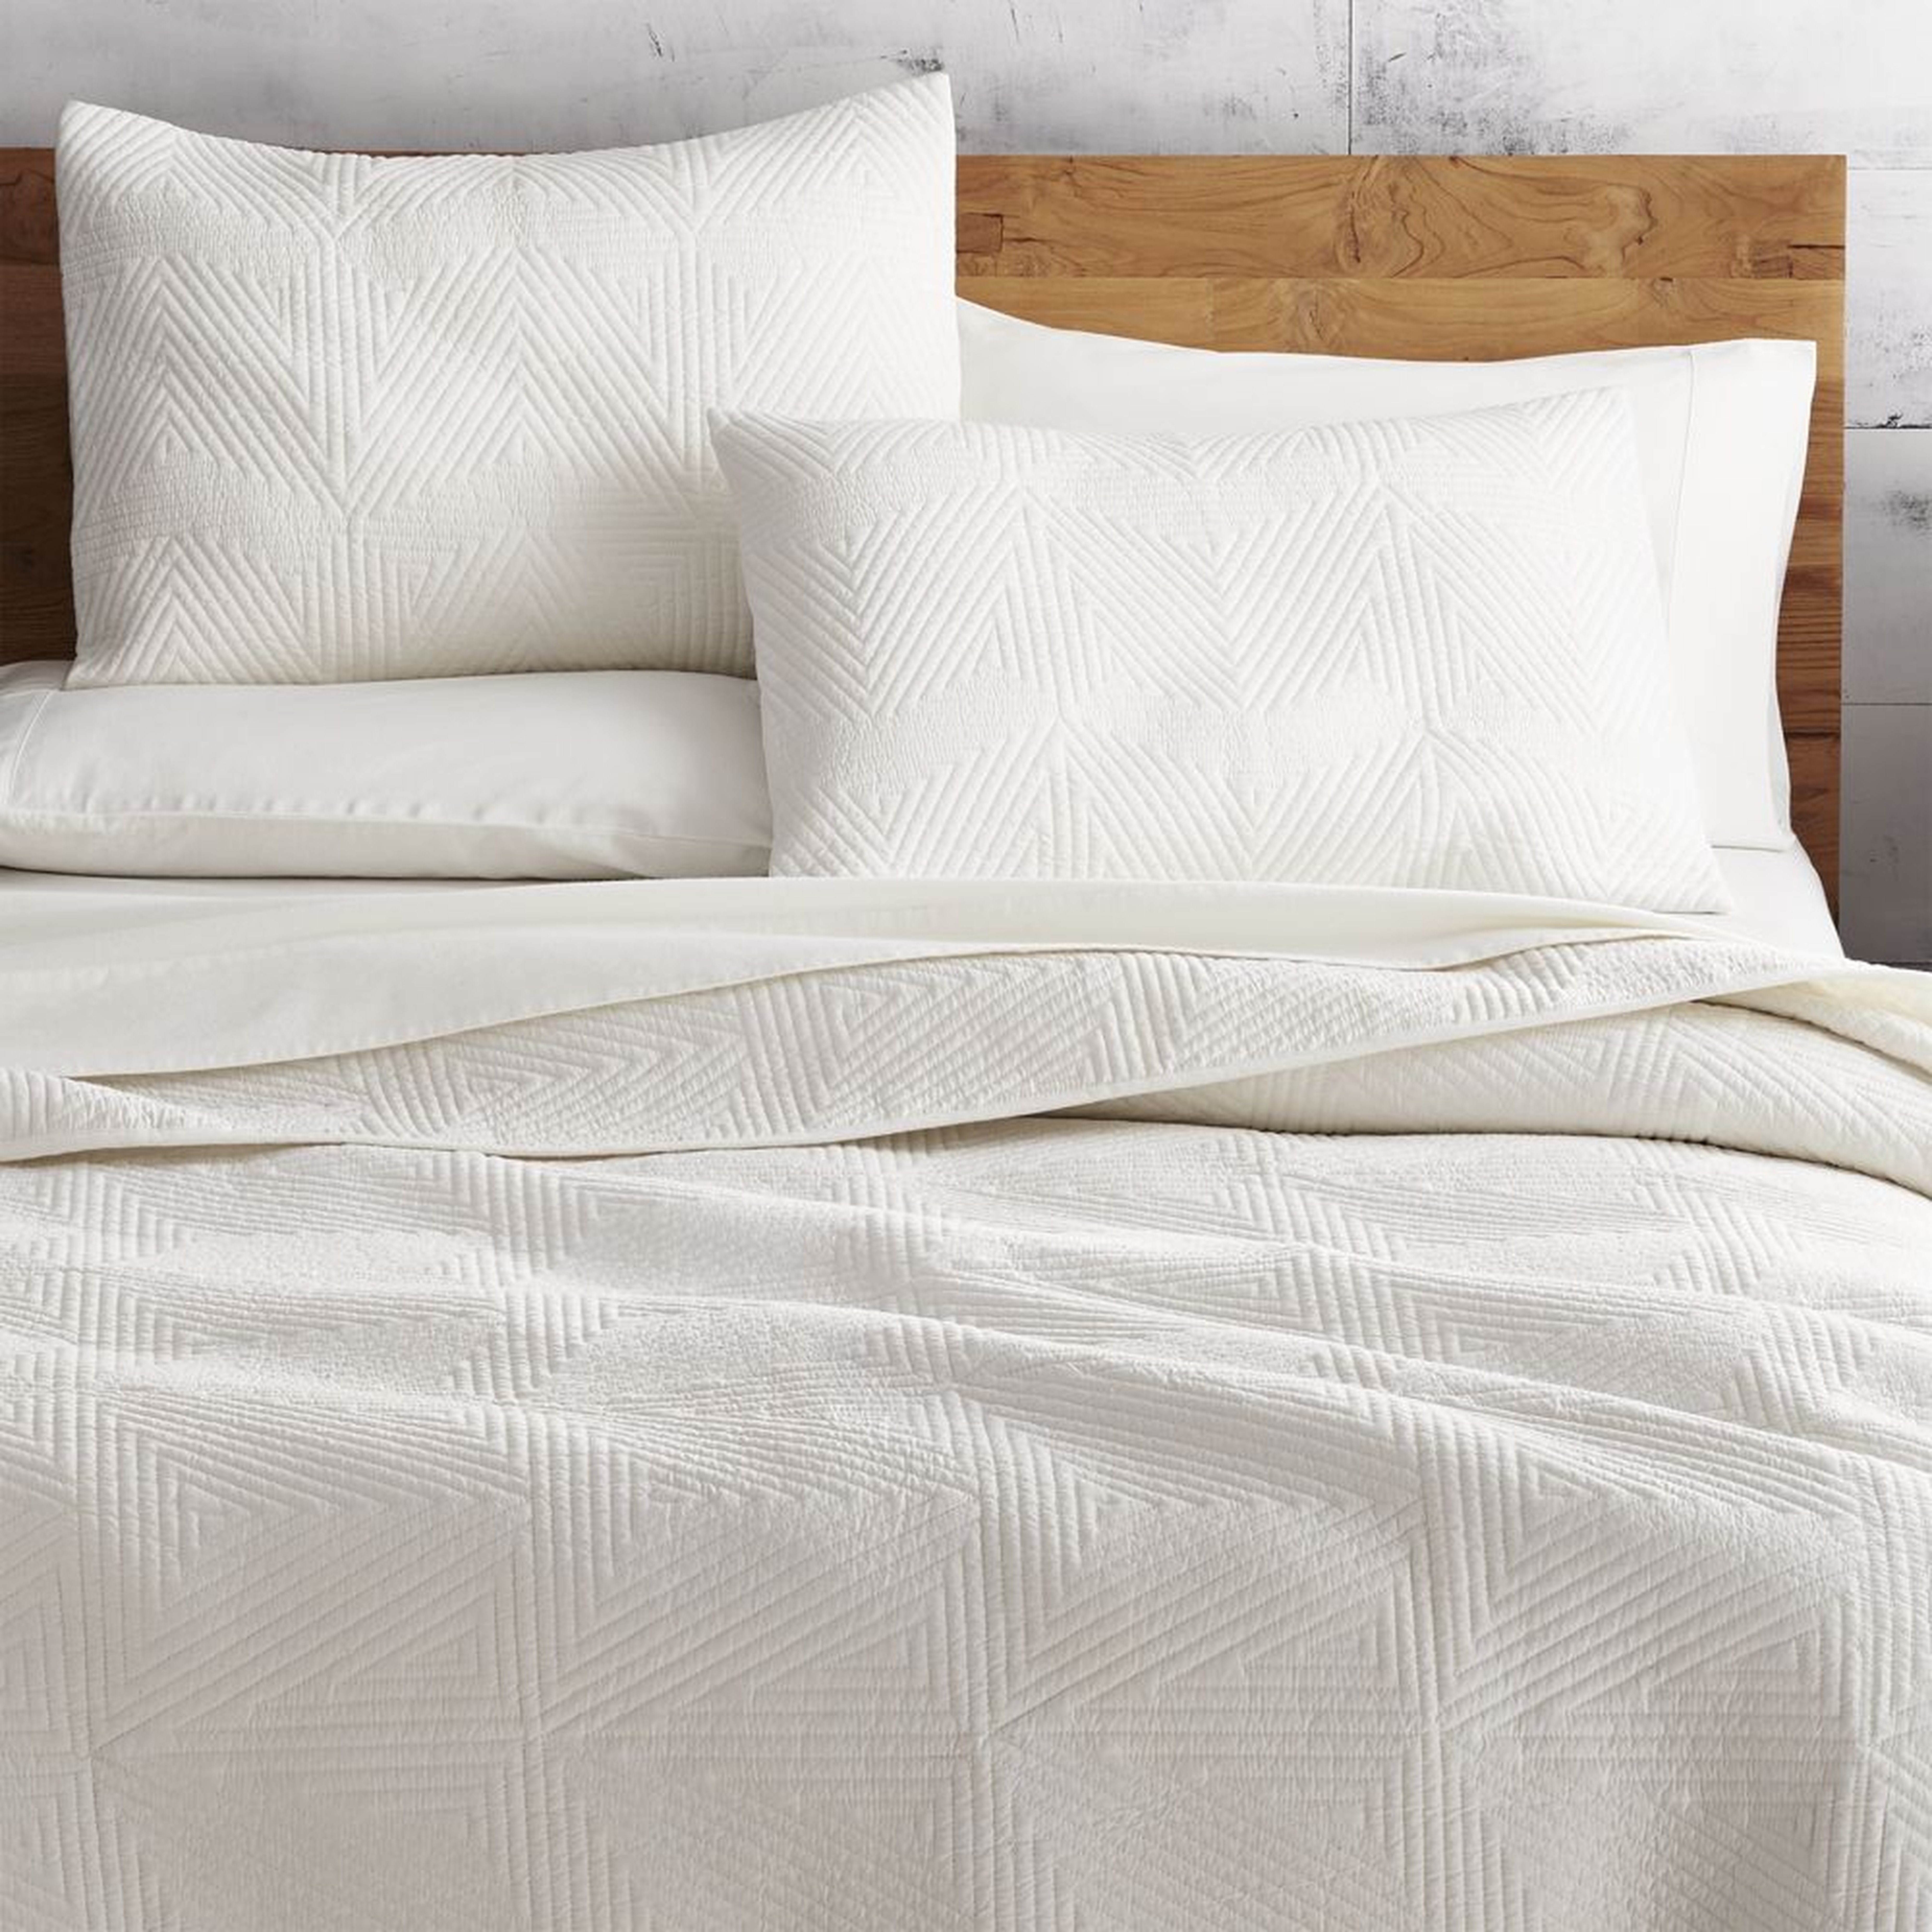 Triangle Warm White Coverlet King - CB2